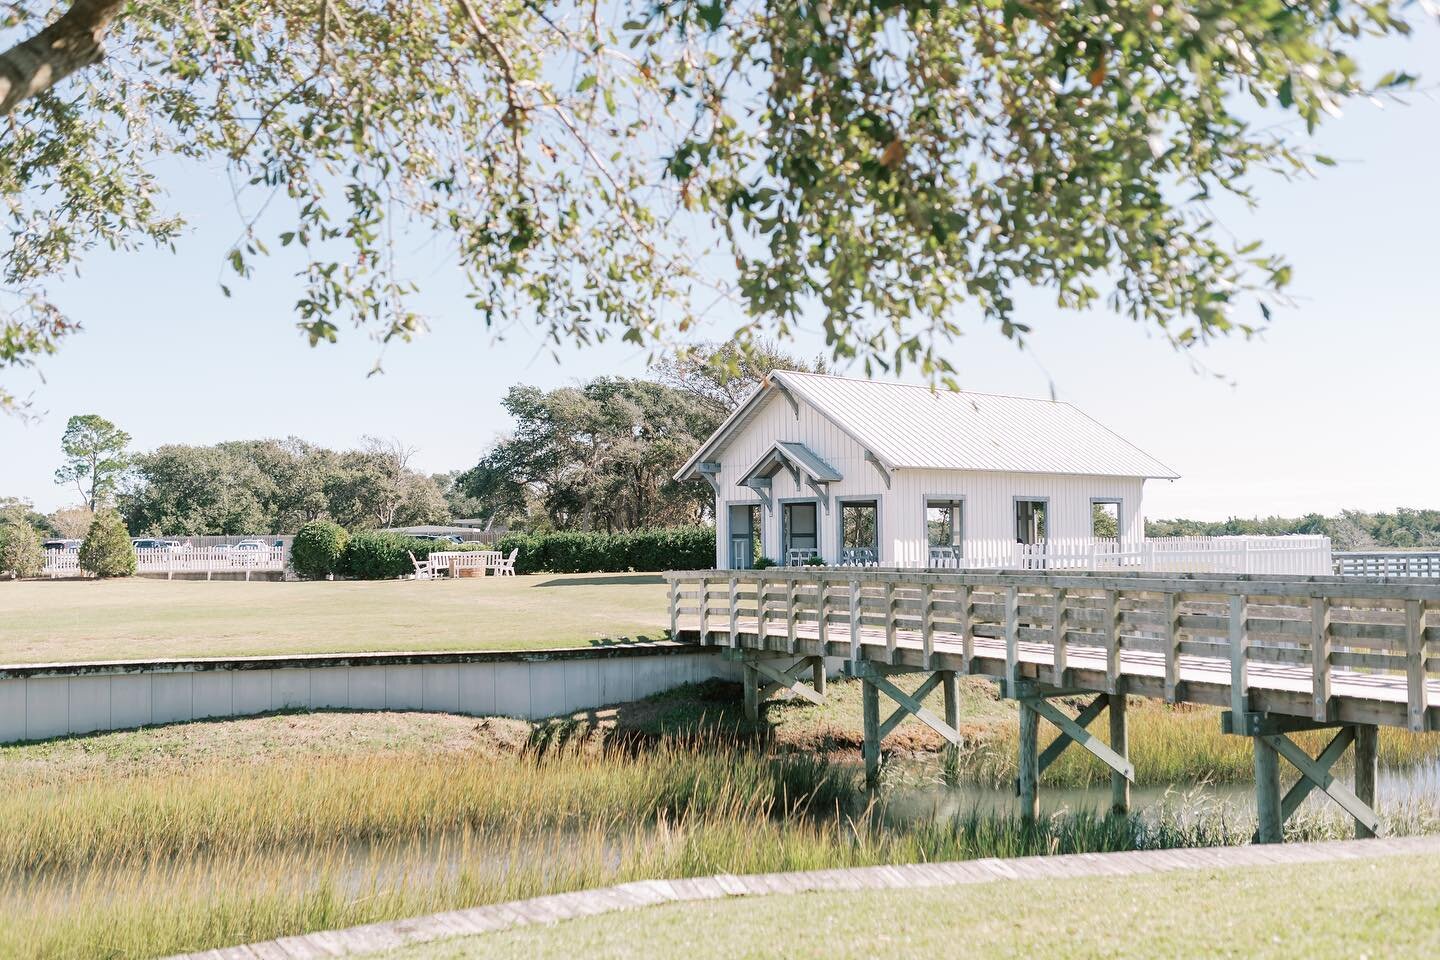 Starting off our 2024 wedding season at one of our favorite places! We can&rsquo;t wait to celebrate L + C at The Beaufort Hotel this weekend surrounded by their family and friends!
&bull;
&bull;
2 0 2 4 Spring Season - WE ARE READY FOR YOU 

📸: @ca